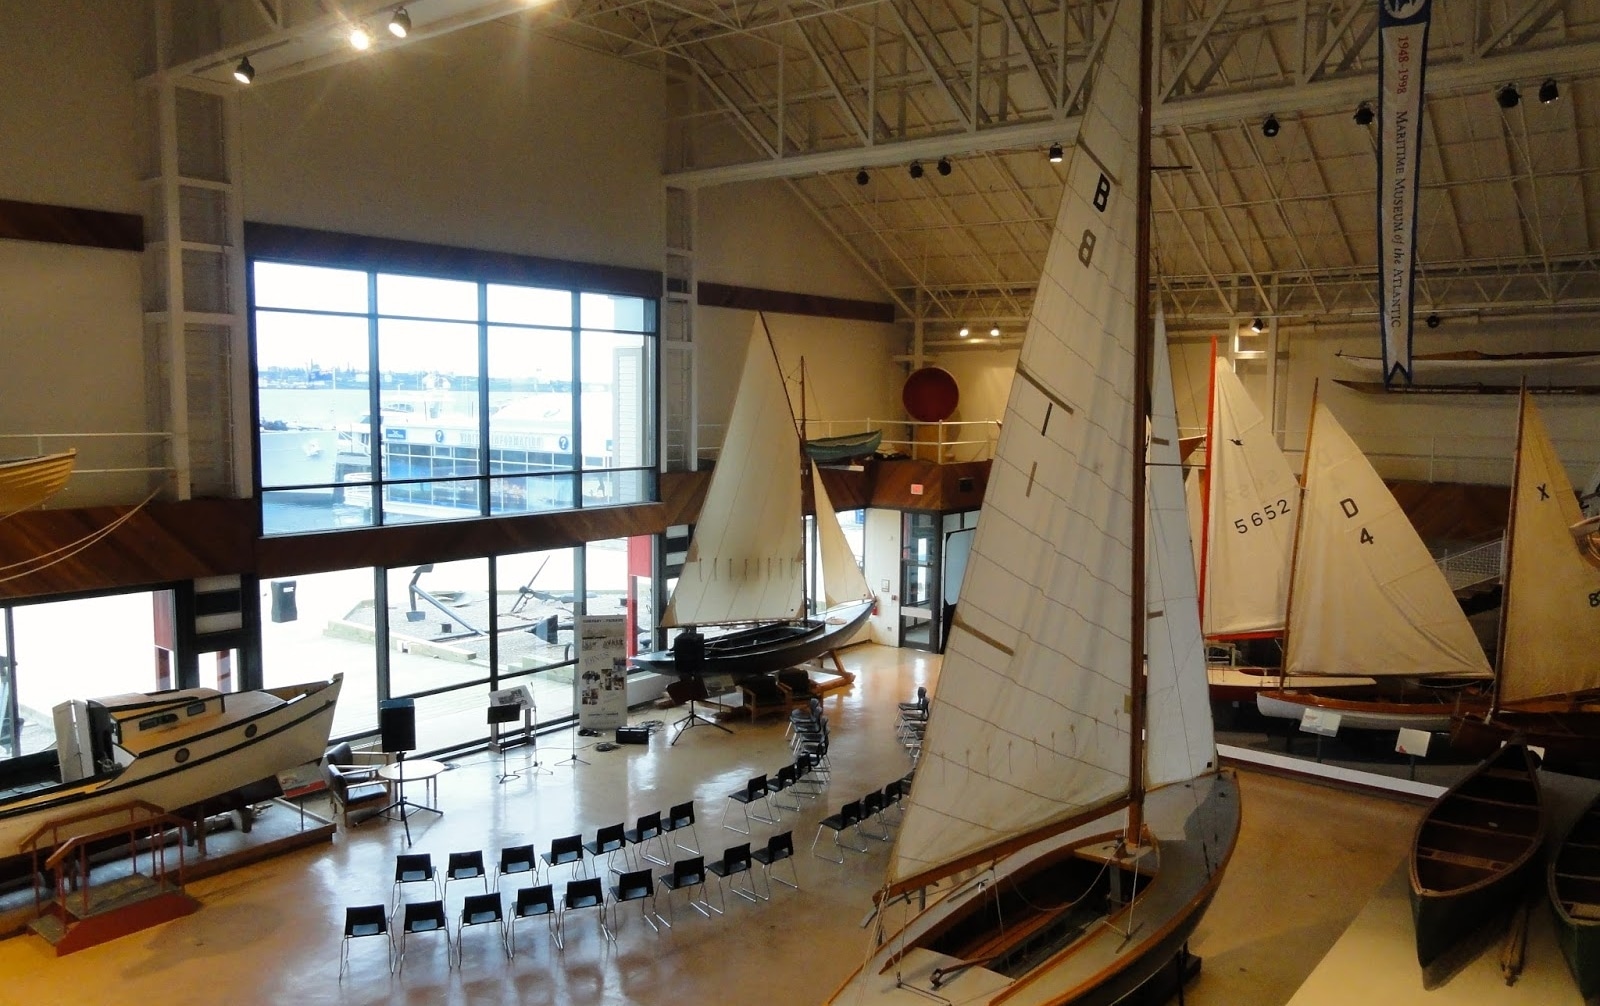 Maritime Museum of the Atlantic. Fly Private Jet to Halifax.